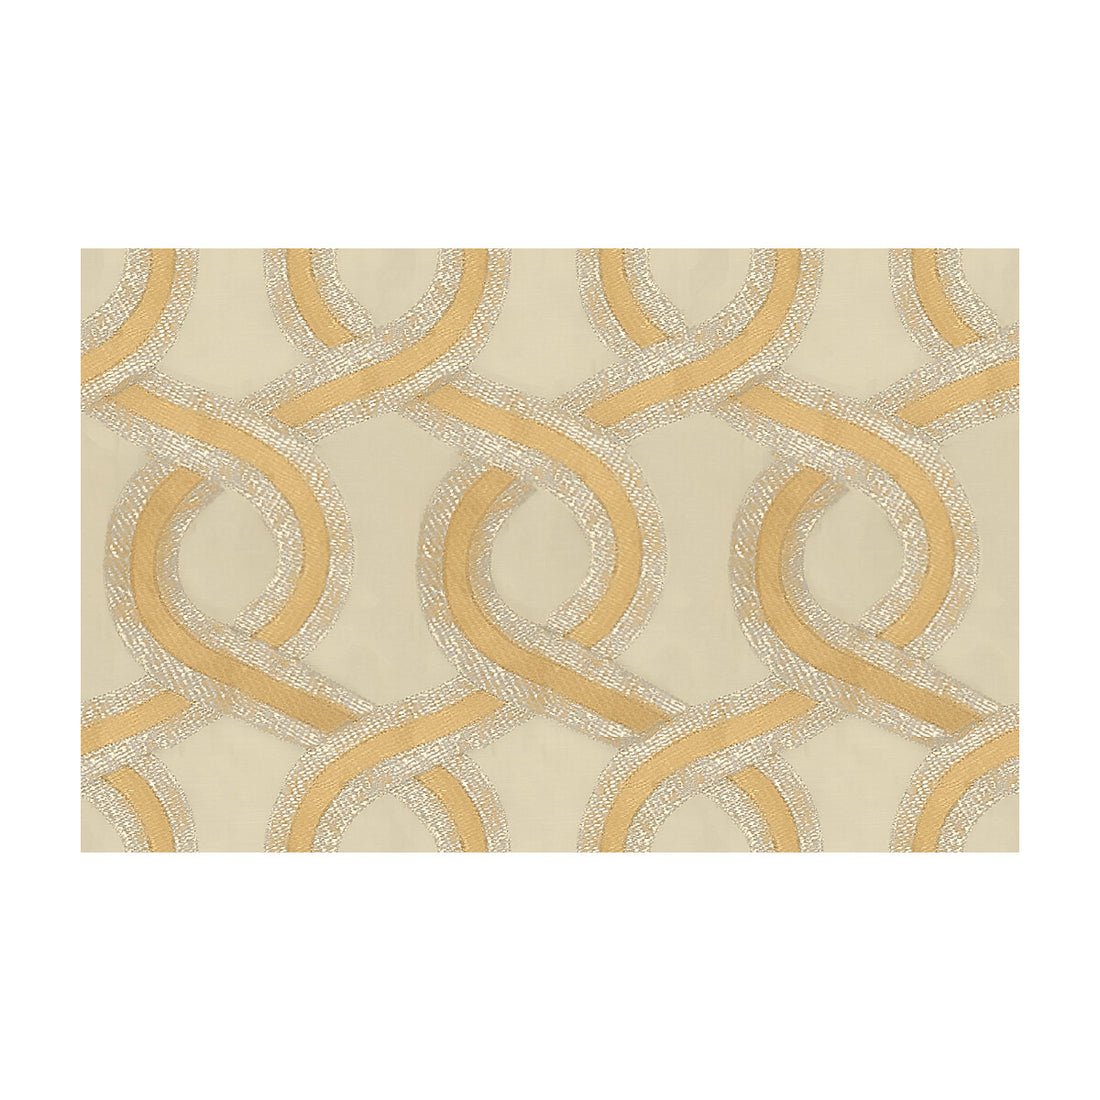 Luminous Luxury fabric in white gold color - pattern 33627.416.0 - by Kravet Couture in the Modern Luxe collection